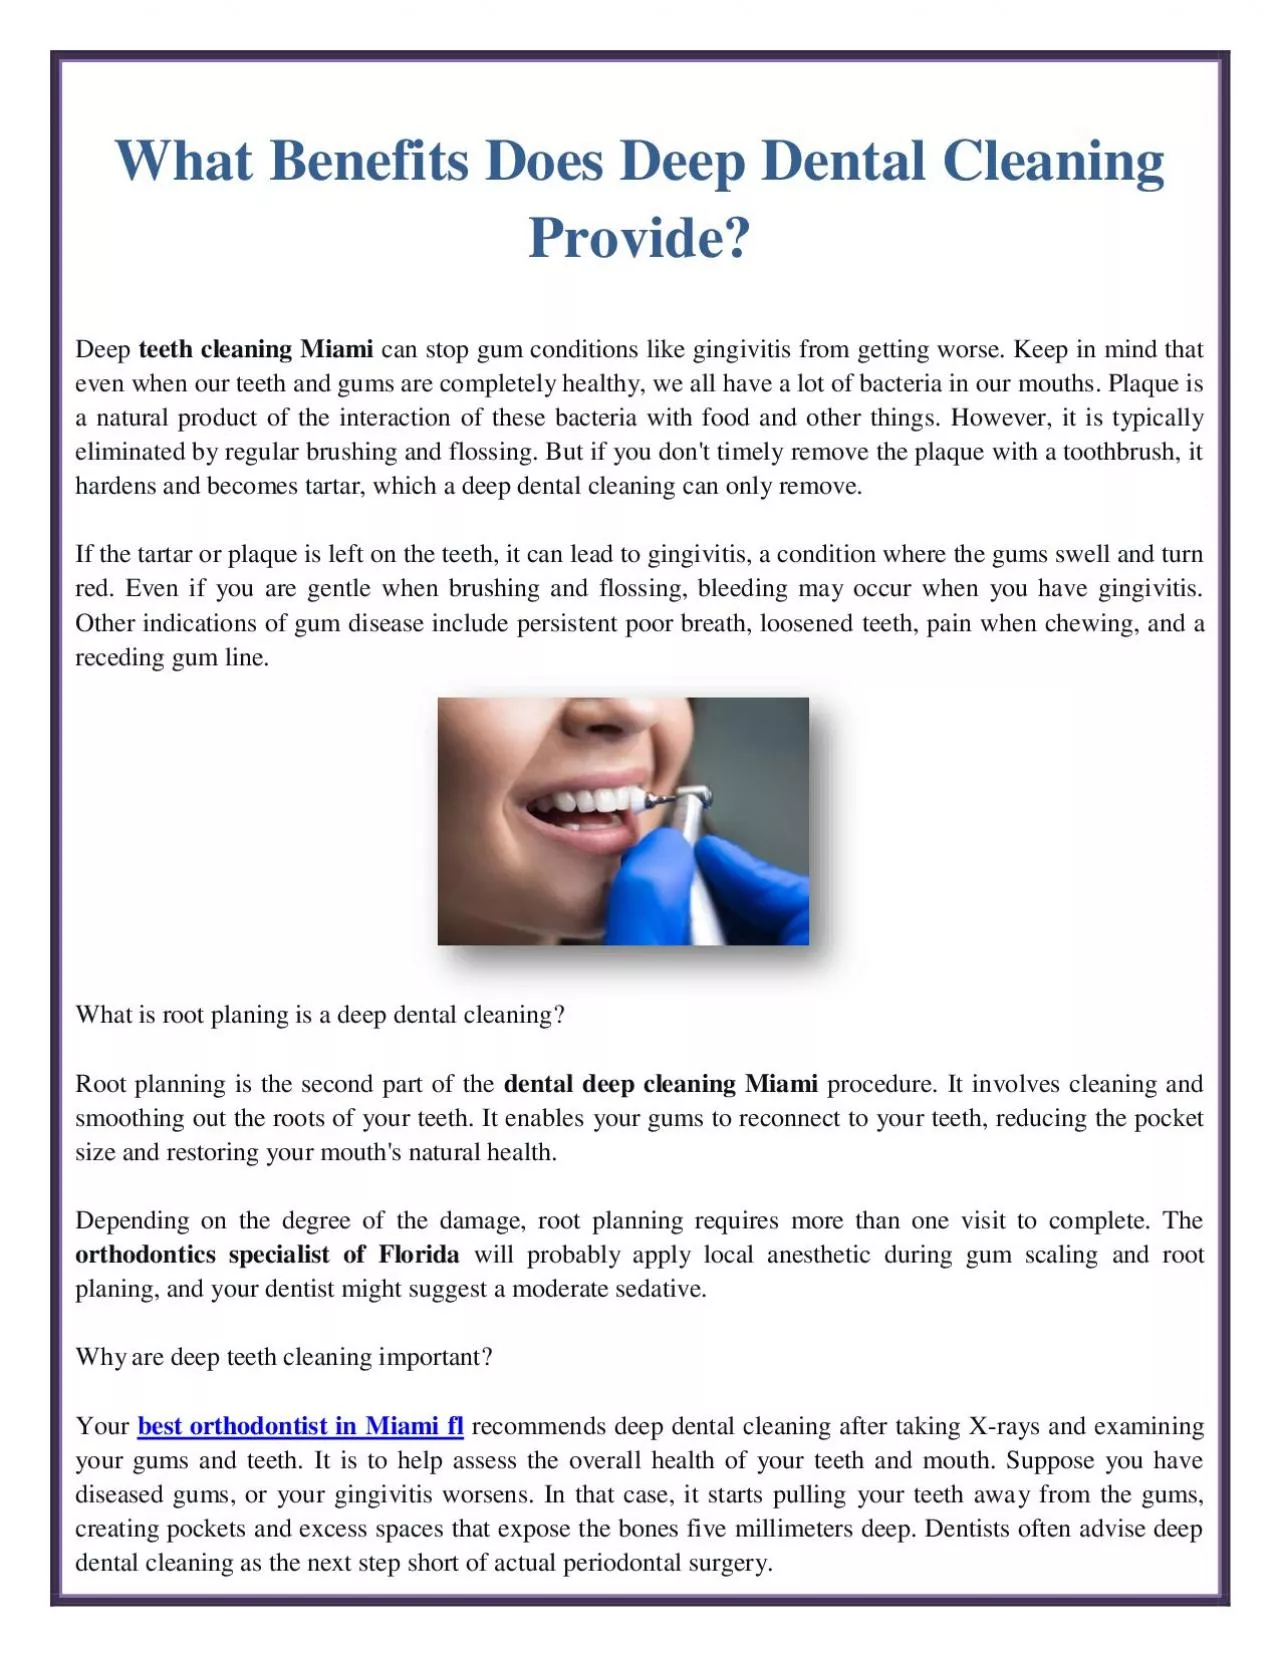 What Benefits Does Deep Dental Cleaning Provide?